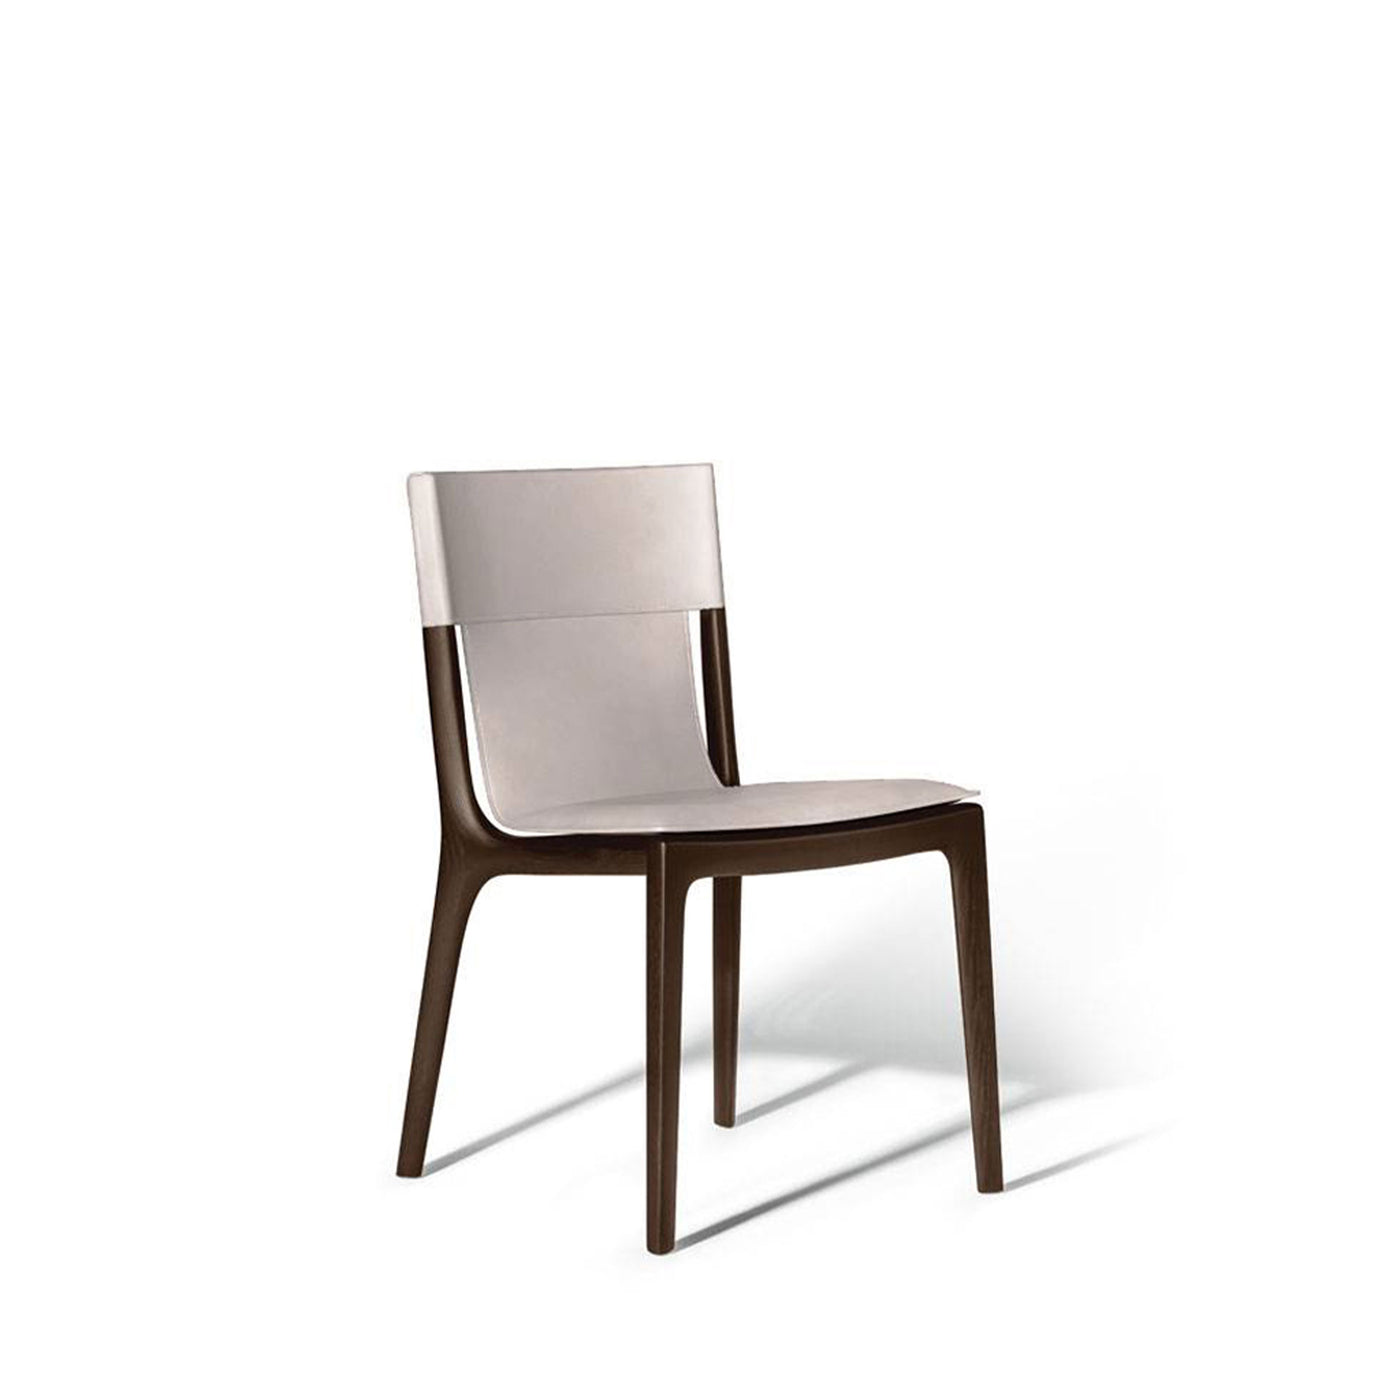 Leather Dining Chair ISADORA by Roberto Lazzeroni for Poltrona Frau 09